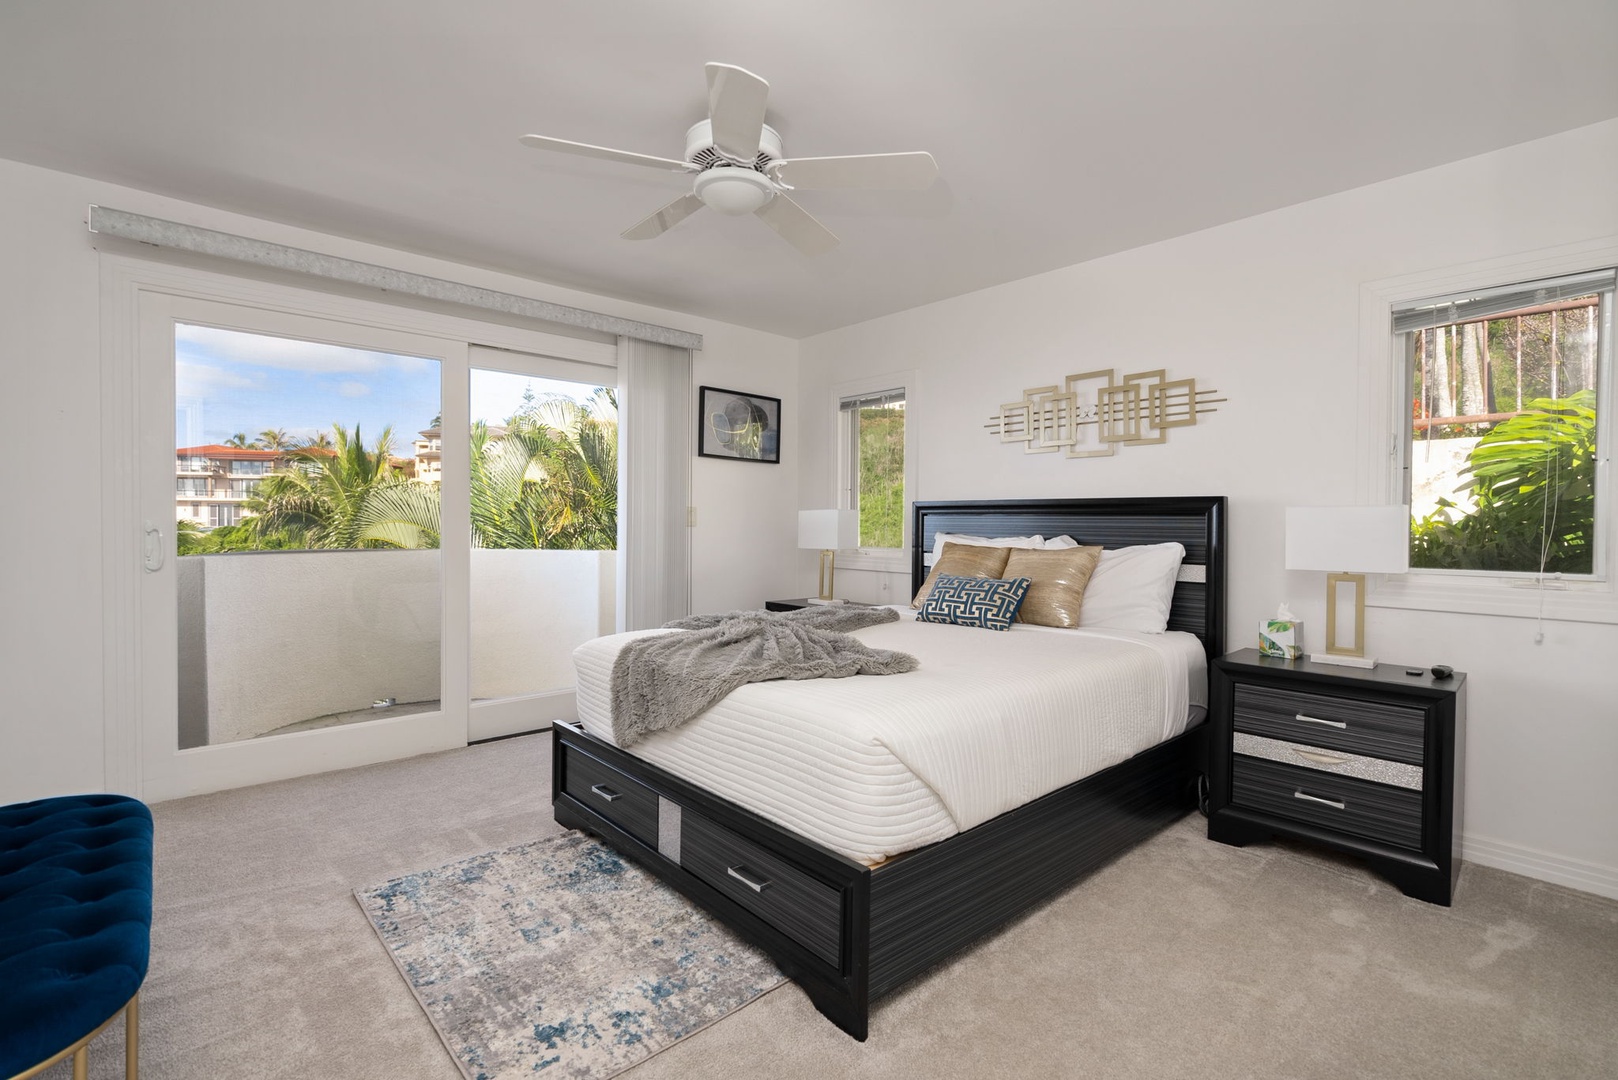 Honolulu Vacation Rentals, Hawaii Ridge Getaway - Partial ocean and mountain views from your bed.